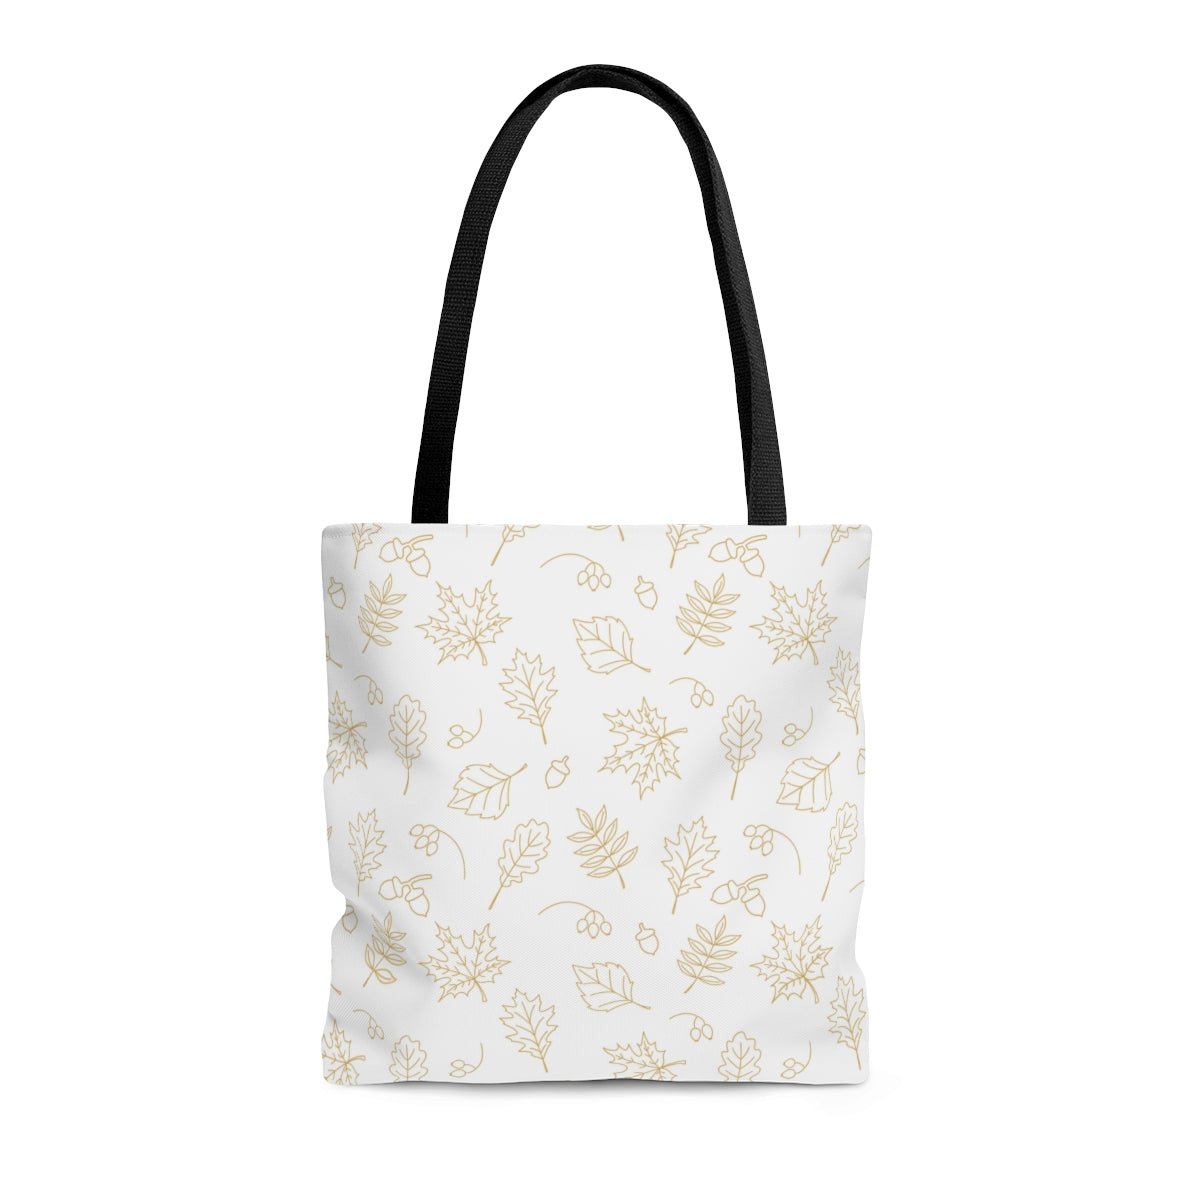 Acorns and Leaves Tote Bag - Puffin Lime